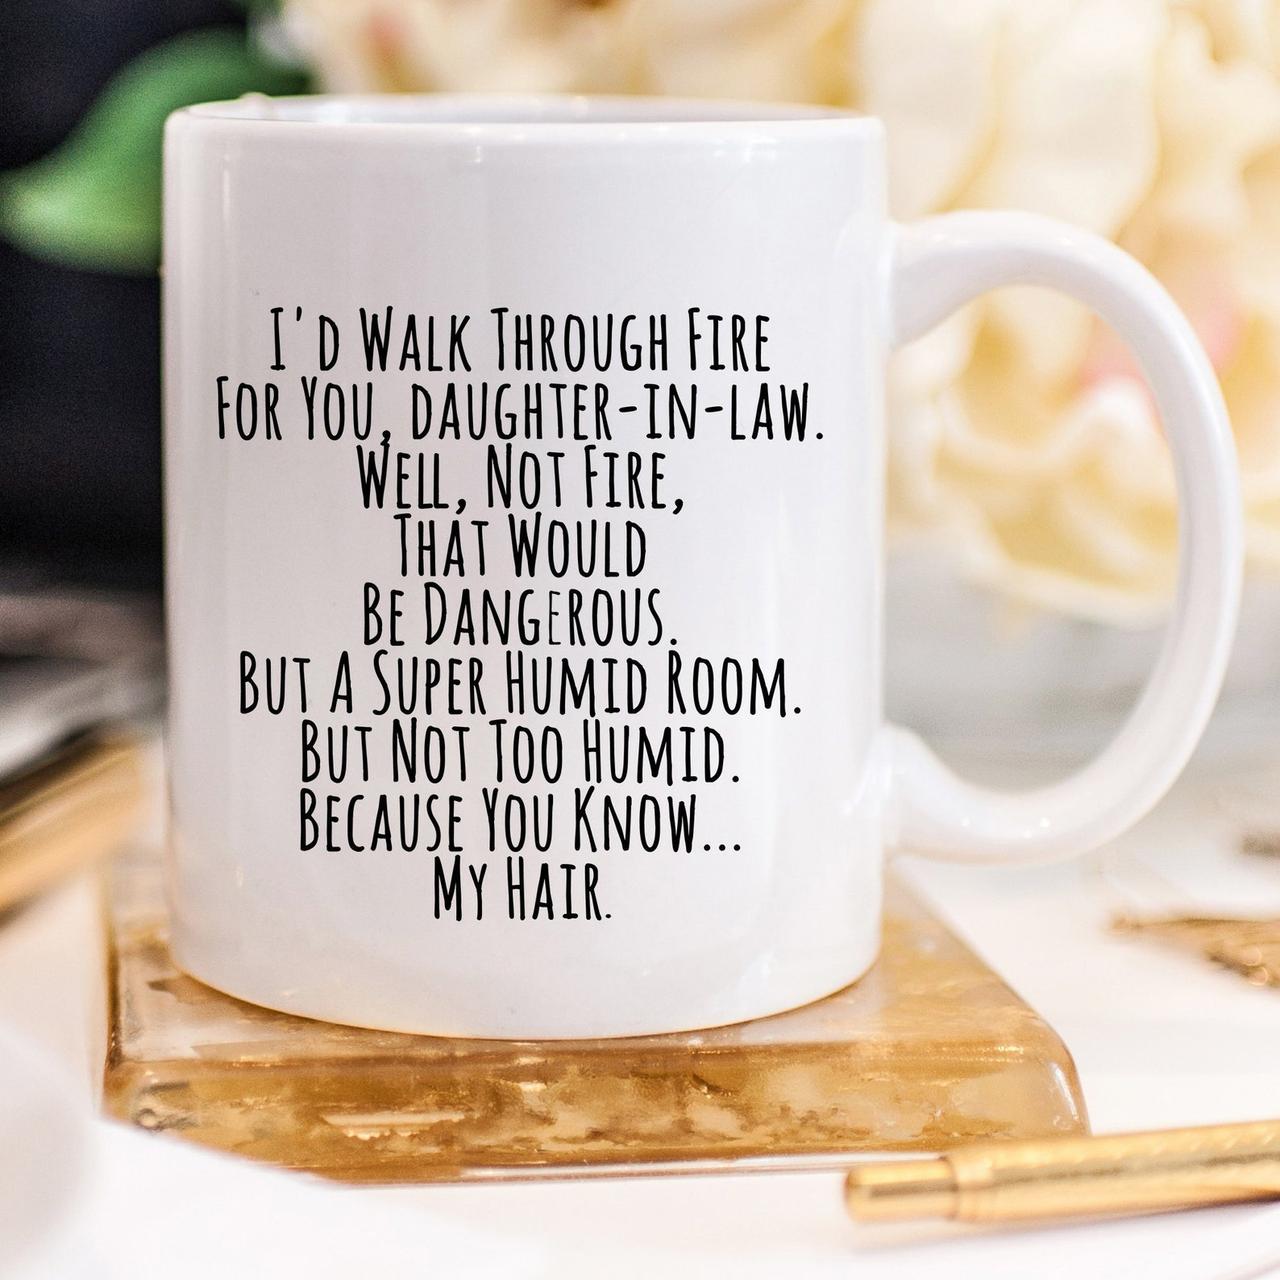 35 Gifts for Your Daughter-in-Law That She Won't Regift